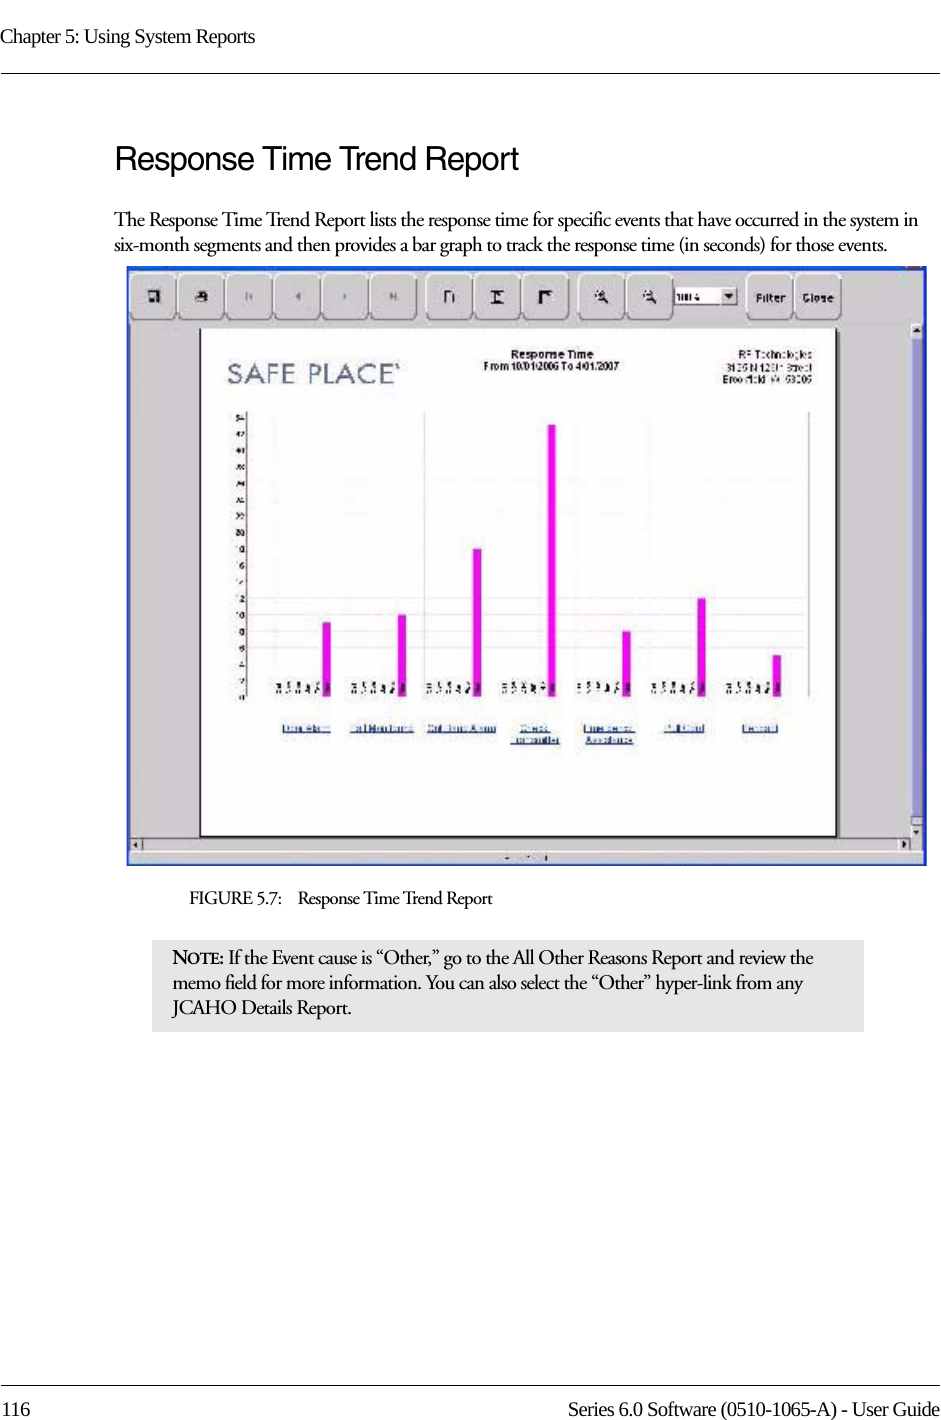 Chapter 5: Using System Reports116 Series 6.0 Software (0510-1065-A) - User GuideResponse Time Trend ReportThe Response Time Trend Report lists the response time for specific events that have occurred in the system in six-month segments and then provides a bar graph to track the response time (in seconds) for those events.FIGURE 5.7:    Response Time Trend ReportNOTE: If the Event cause is “Other,” go to the All Other Reasons Report and review the memo field for more information. You can also select the “Other” hyper-link from any JCAHO Details Report.